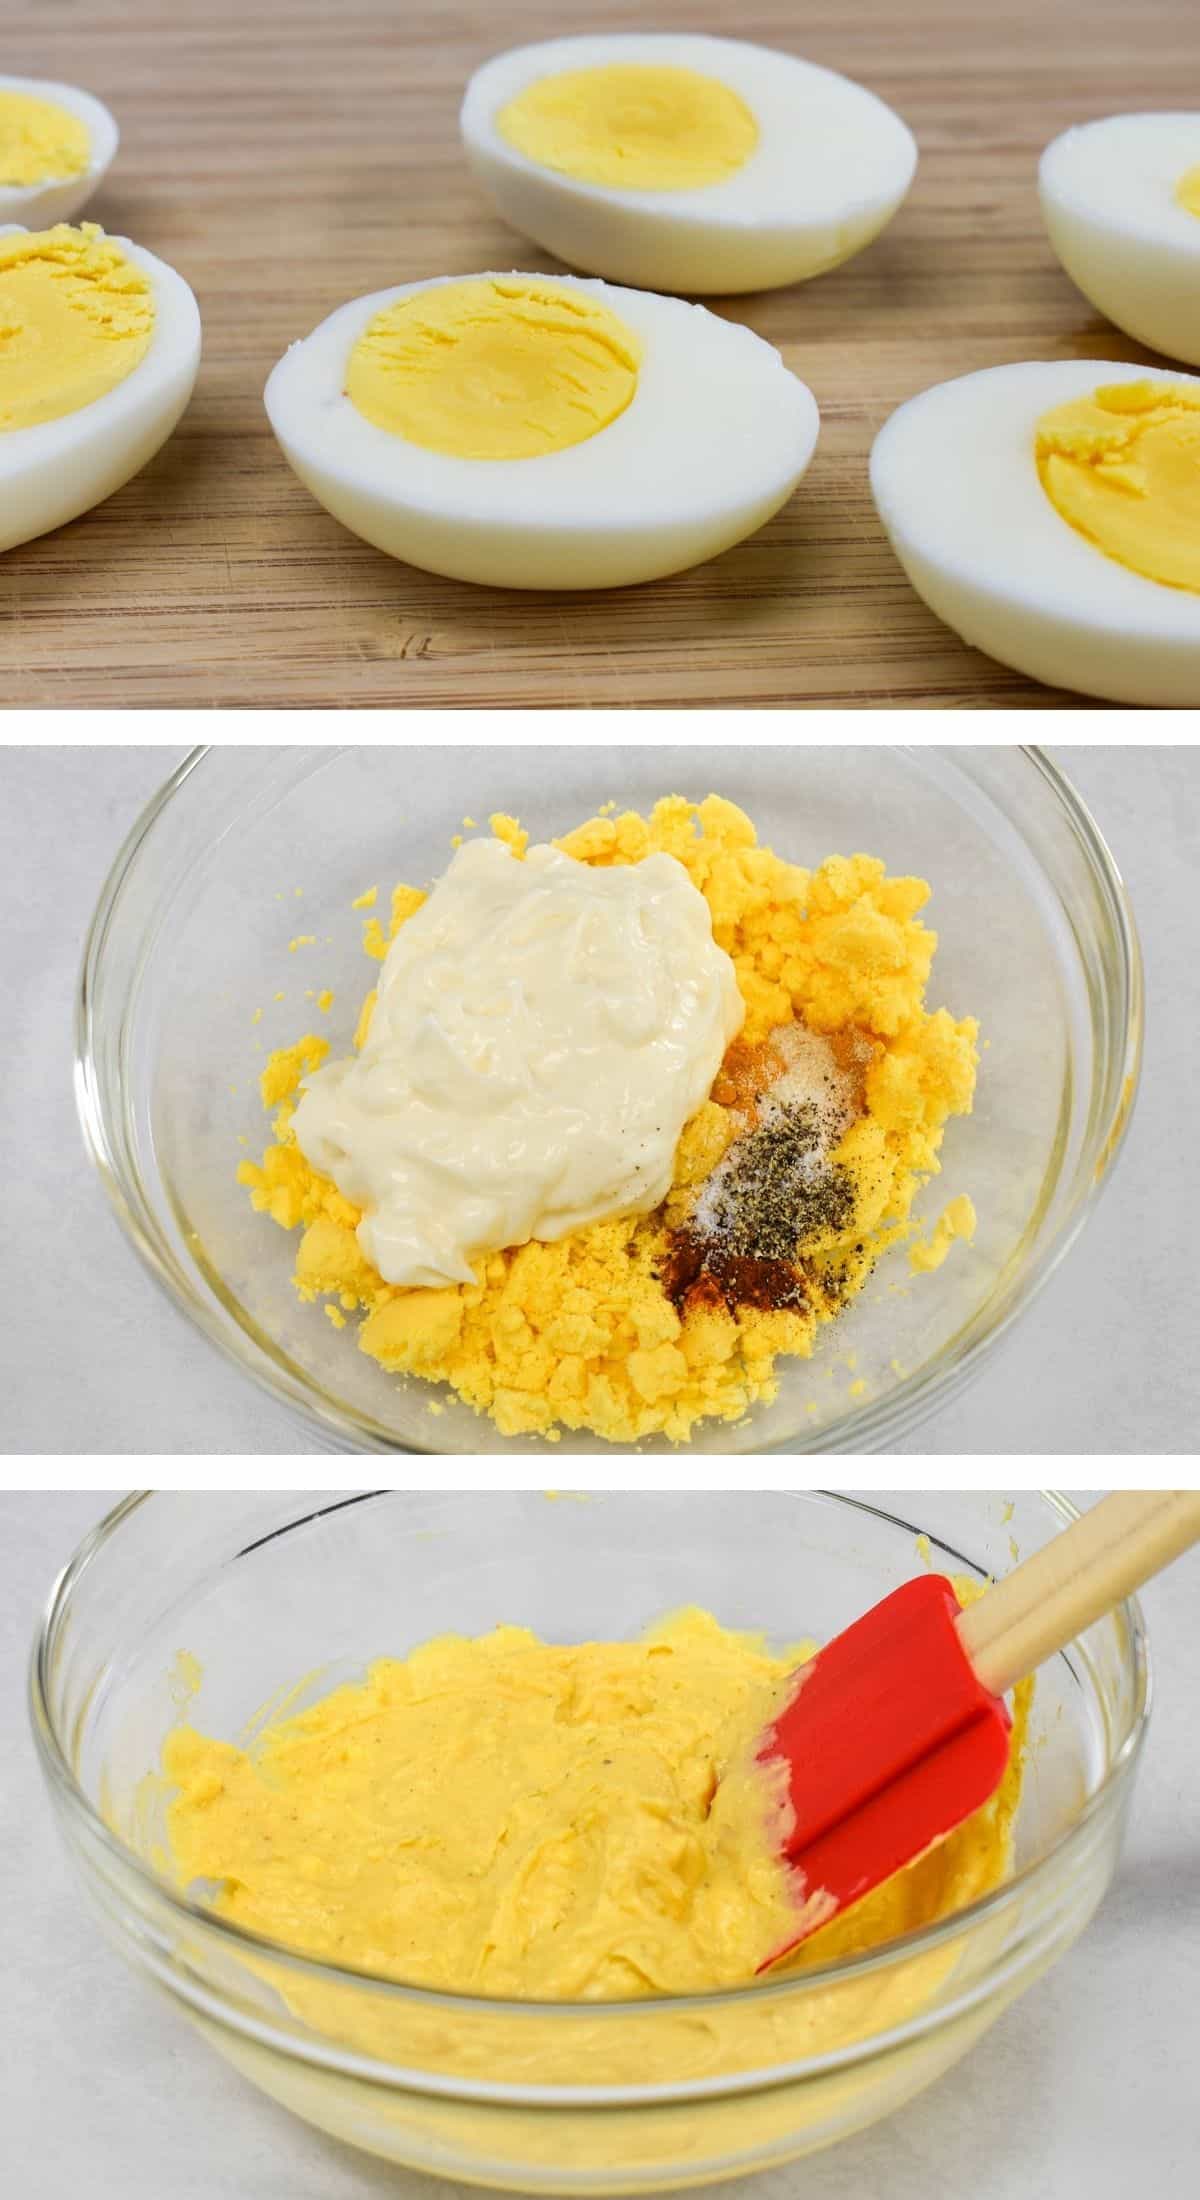 A collage of three images showing boiled eggs cut in half and a bowl with the ingredients for the yolk filling before and after mixing. The bowl is set on a white table and the last image has a red rubber spatula in the bowl.